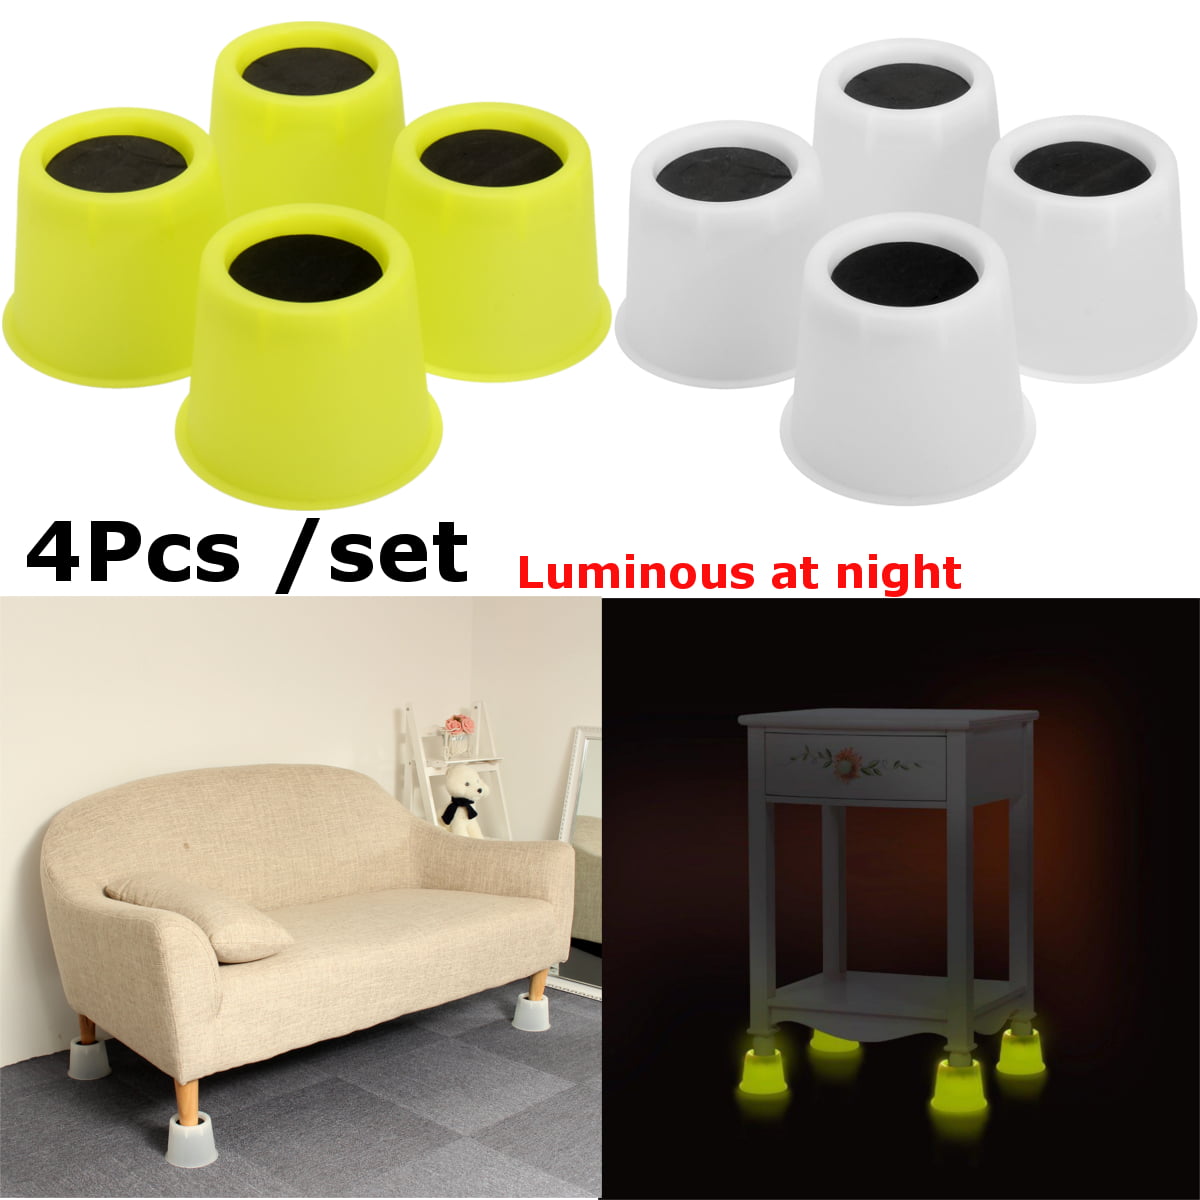 4pcs Pp Bed Riser Chair Booster Furniture Lifter Protectors